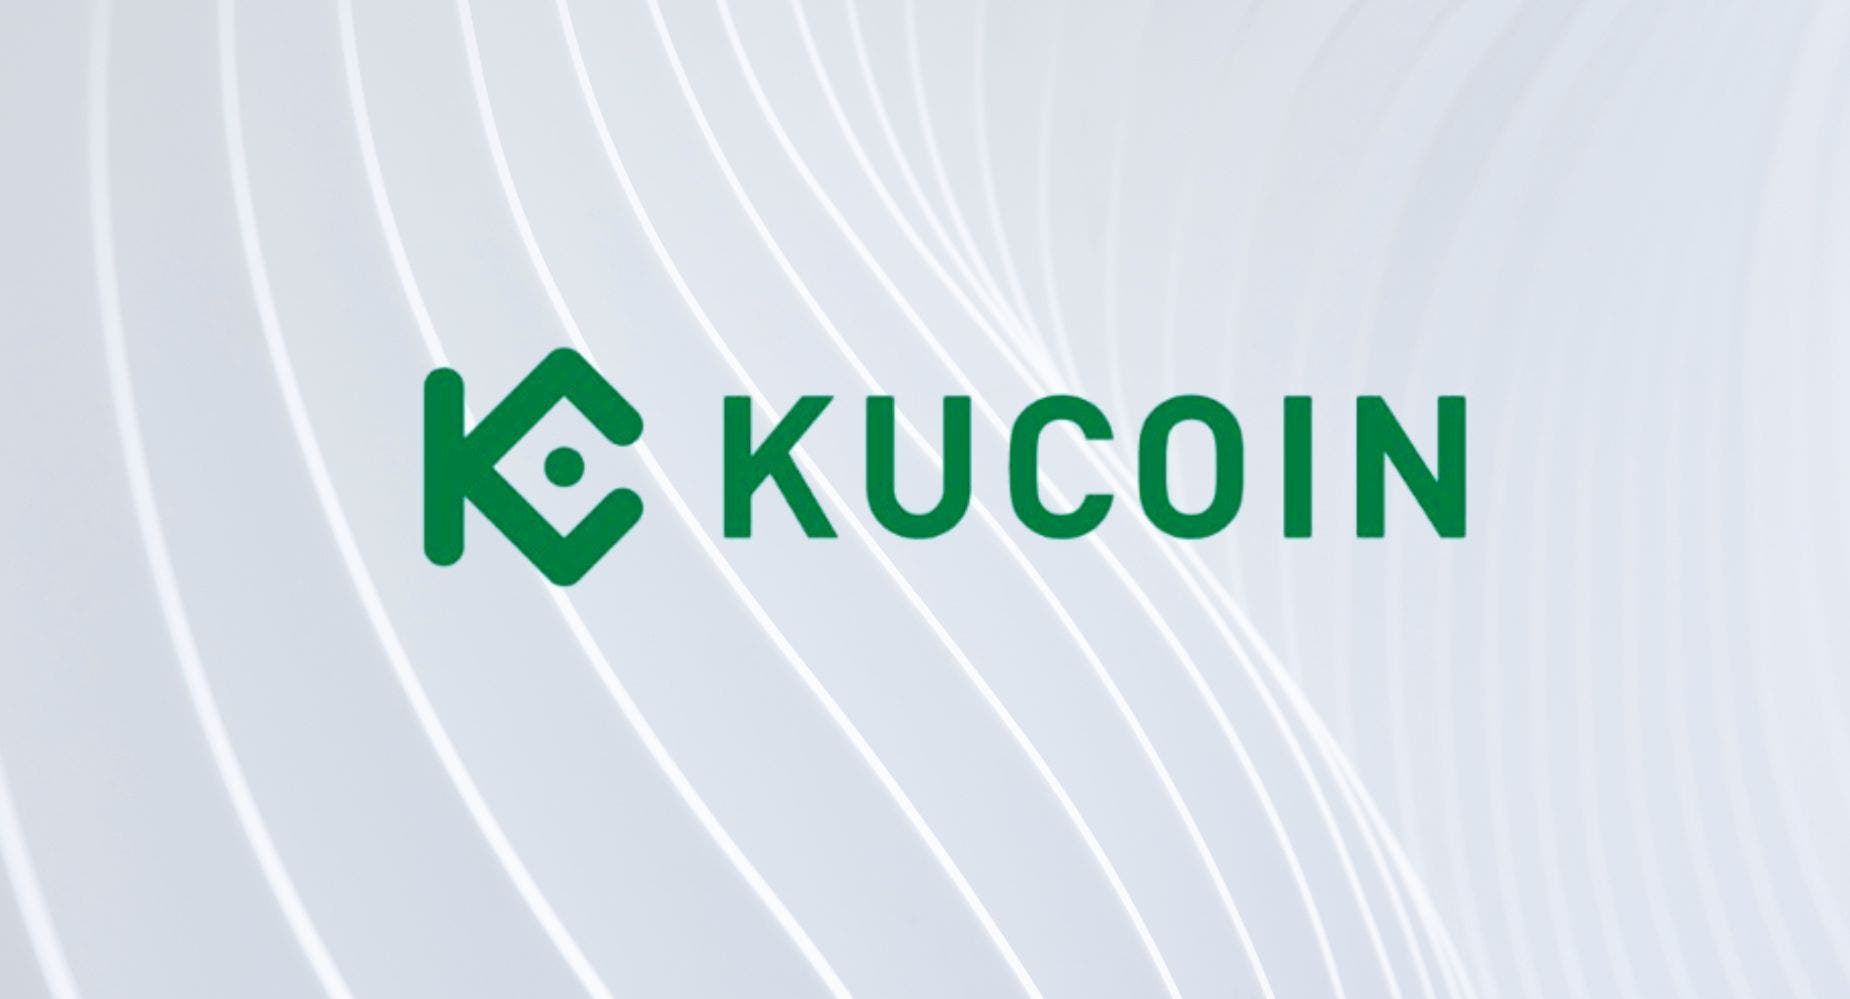 EXCLUSIVE: Kucoin In Talks To Buyout Ailing Crypto Companies, Says CEO